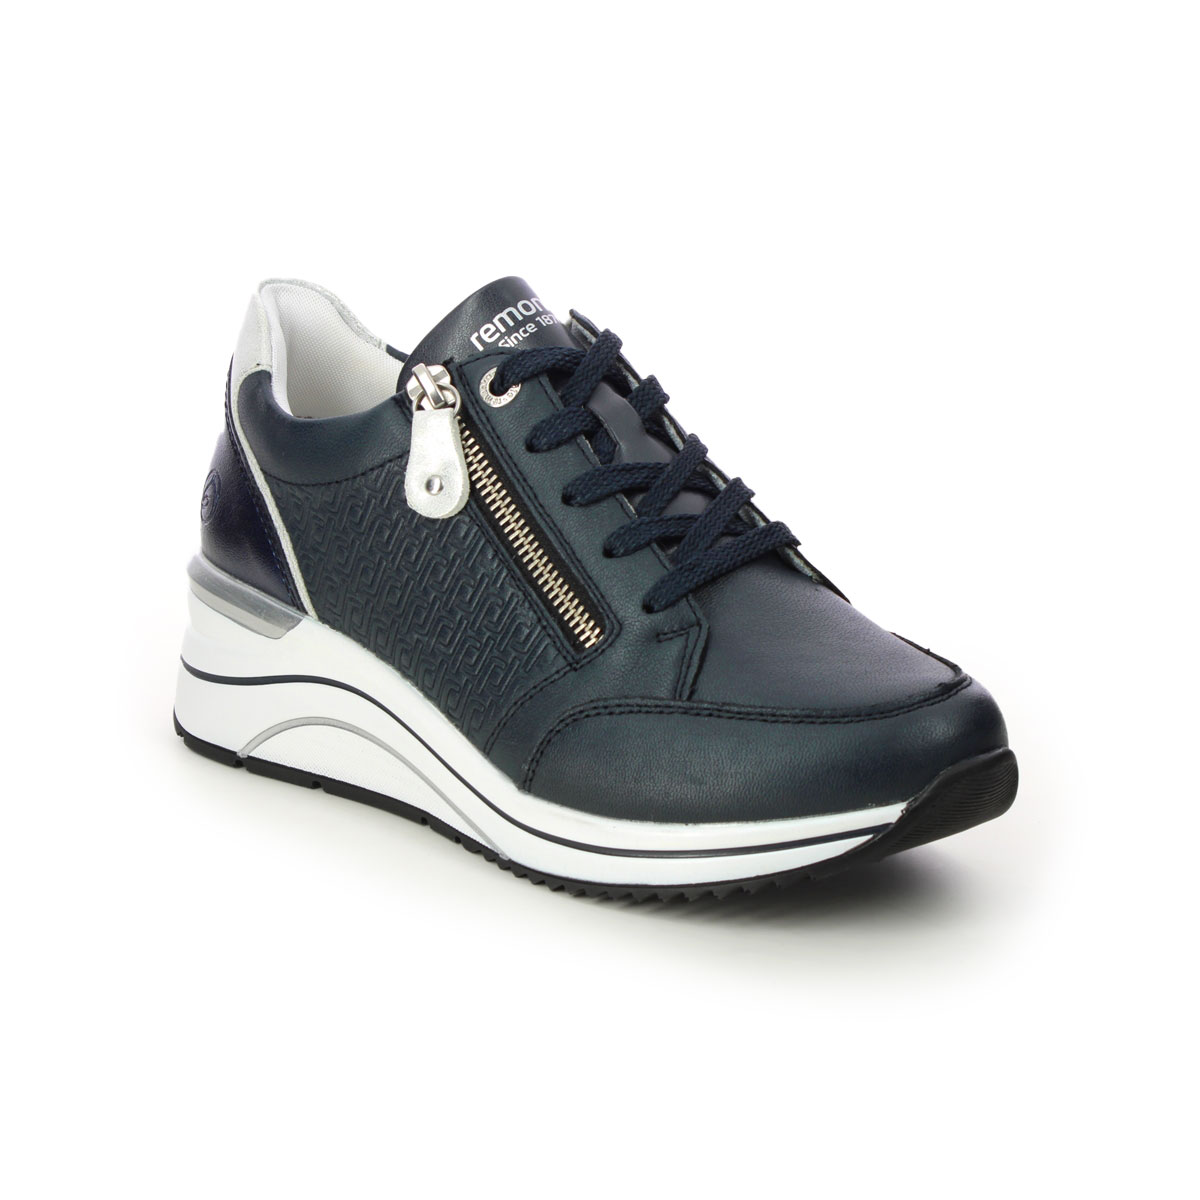 Remonte D0T03-14 Ranzip Wedge Navy Leather Womens trainers in a Plain Leather in Size 40